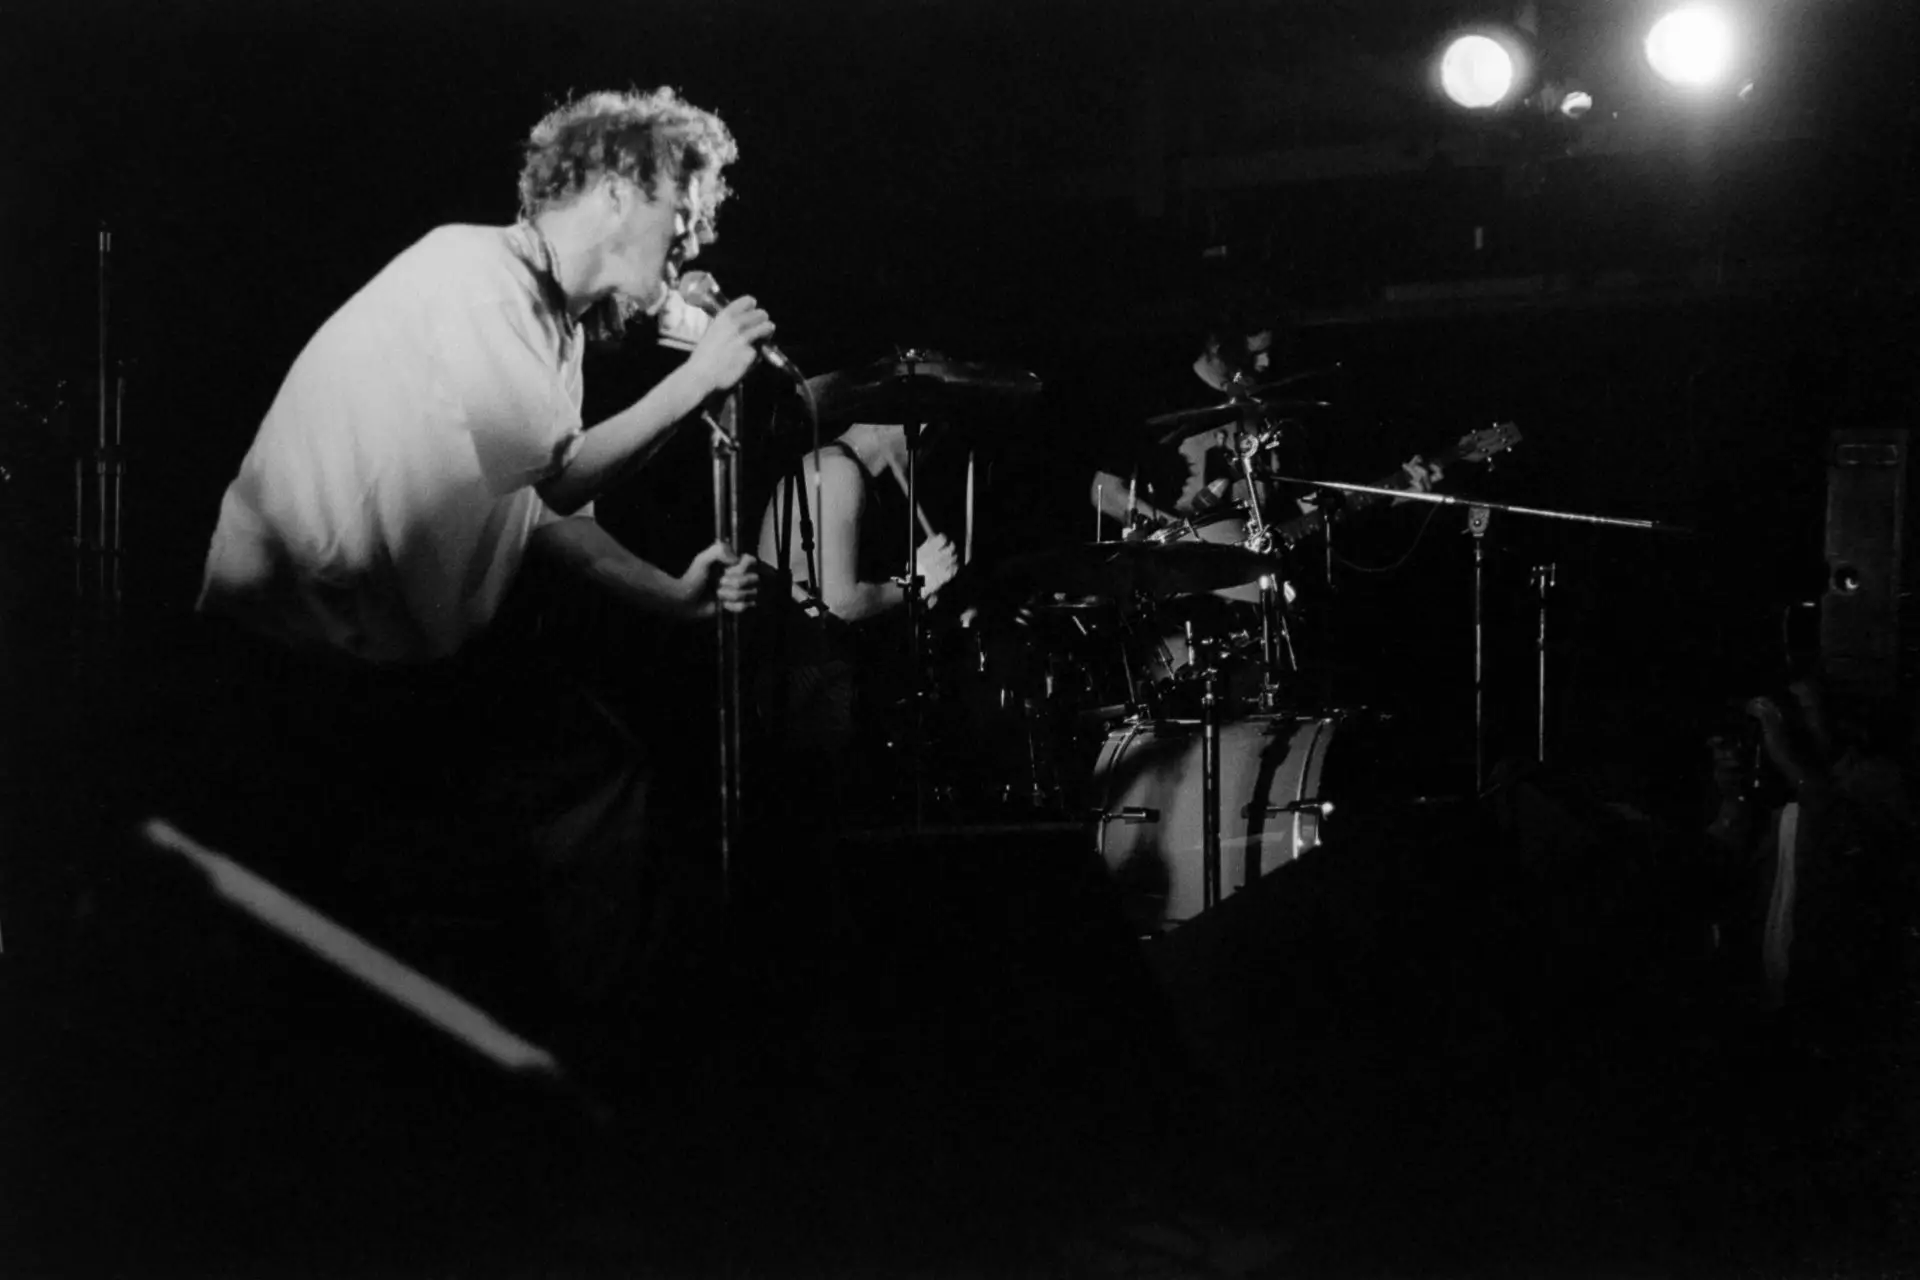 black and white image of a man singing, with a man playing the drums in the background